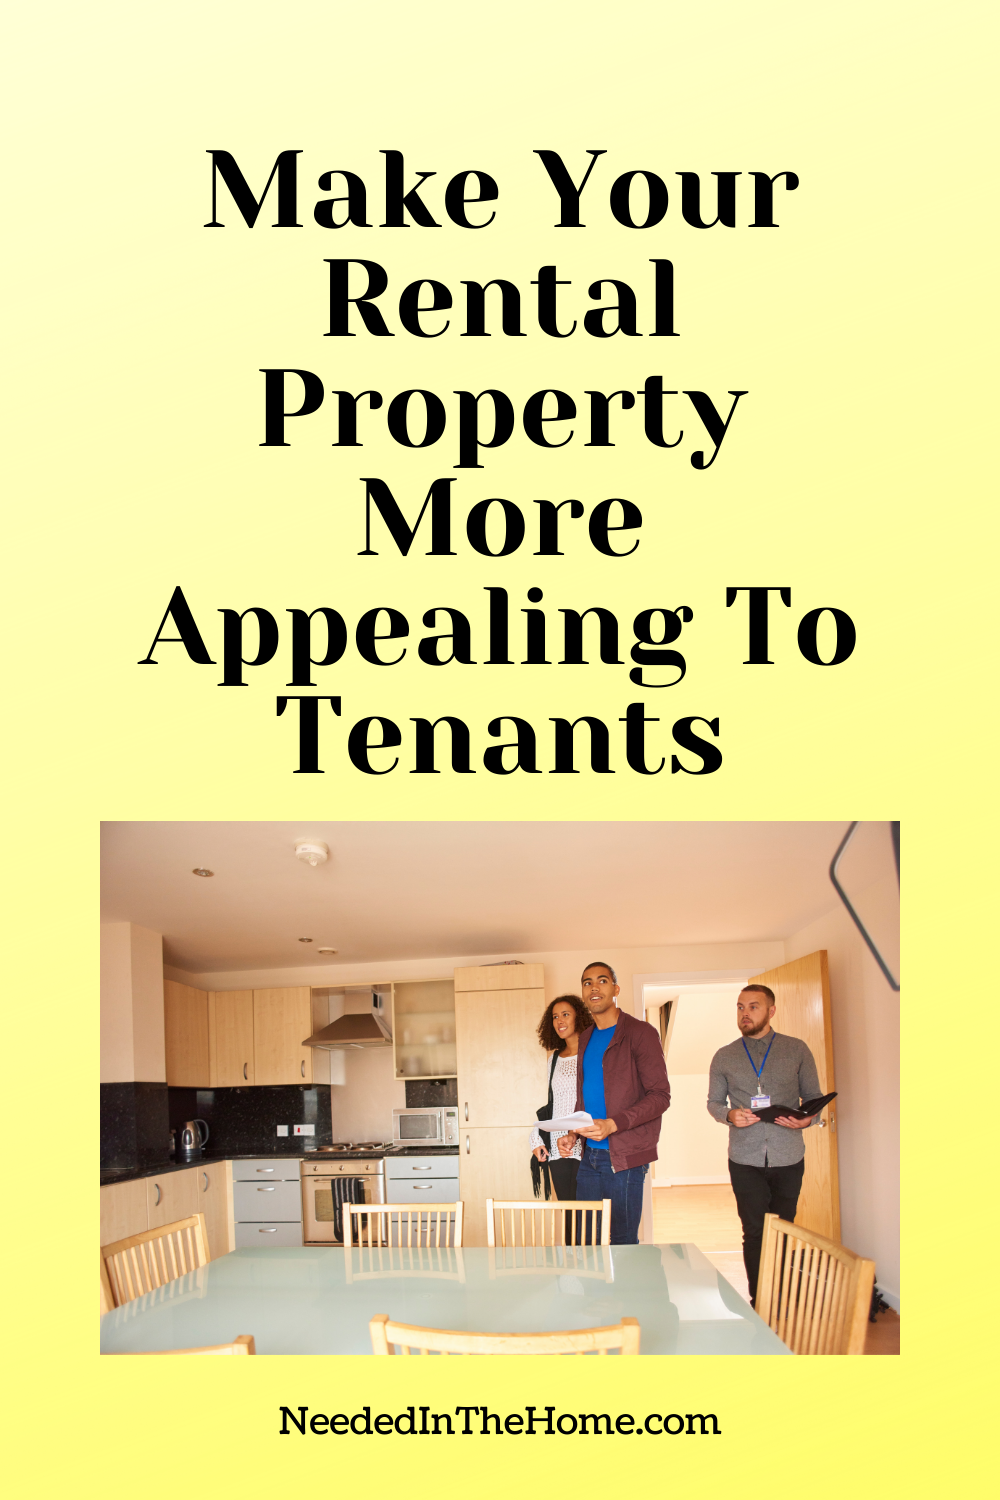 pinterest-pin-description make your rental property more appealing to tenants property manager showing apartment to couple kitchen dining area neededinthehome